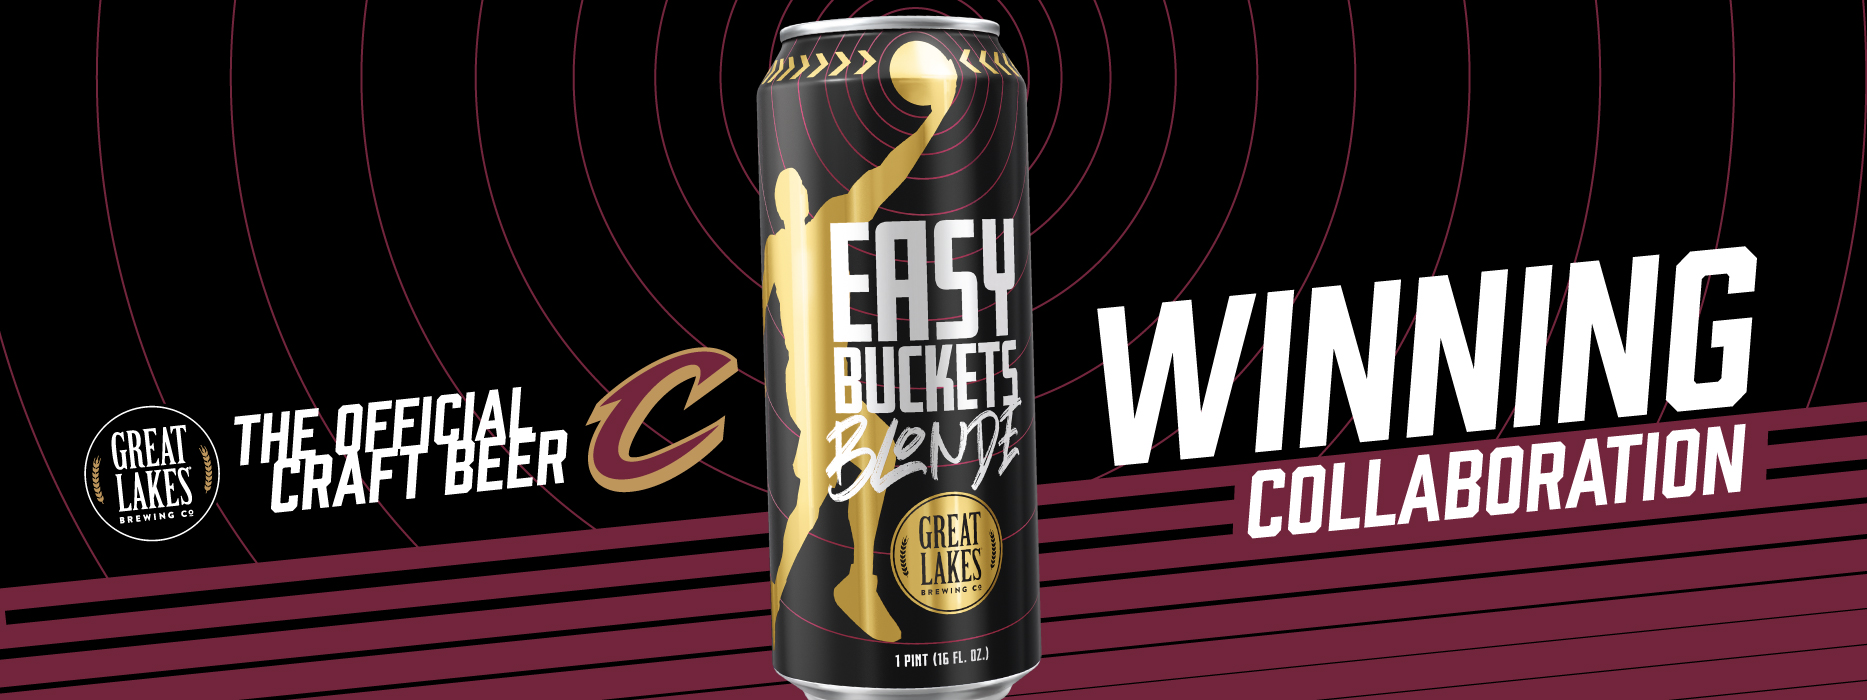 Great Lakes Brewing Company the Official Craft Beer of the Cleveland Cavaliers. Easy Buckets Blonde Can with Text "A Winning Collaboration"